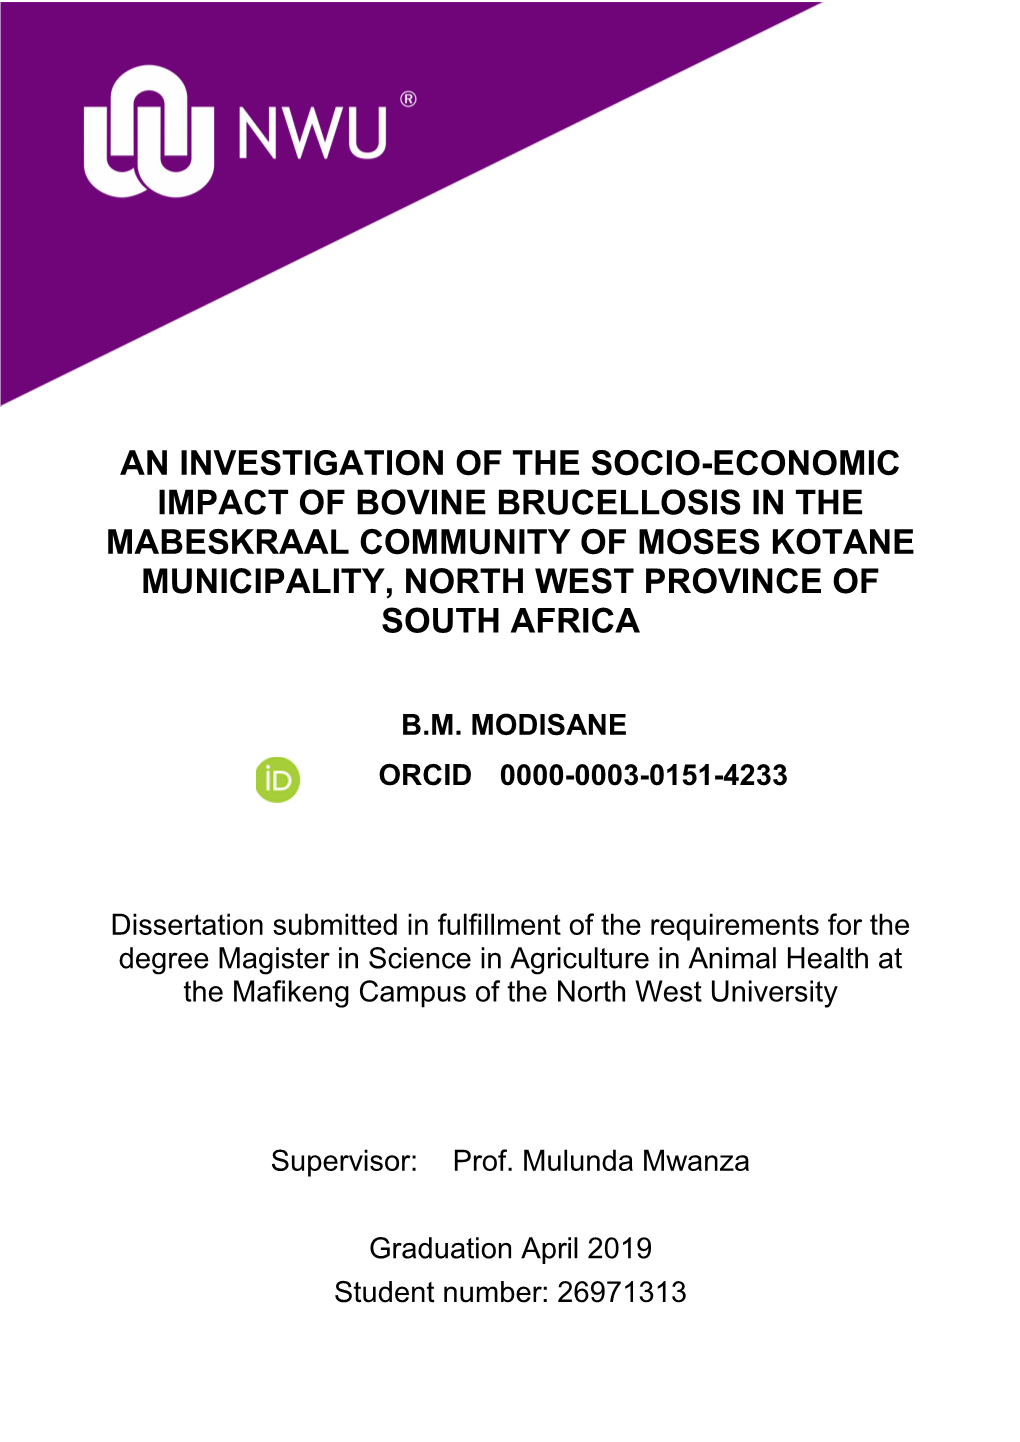 An Investigation of the Socio-Economic Impact of Bovine Brucellosis in the Mabeskraal Community of Moses Kotane Municipality, North West Province of South Africa